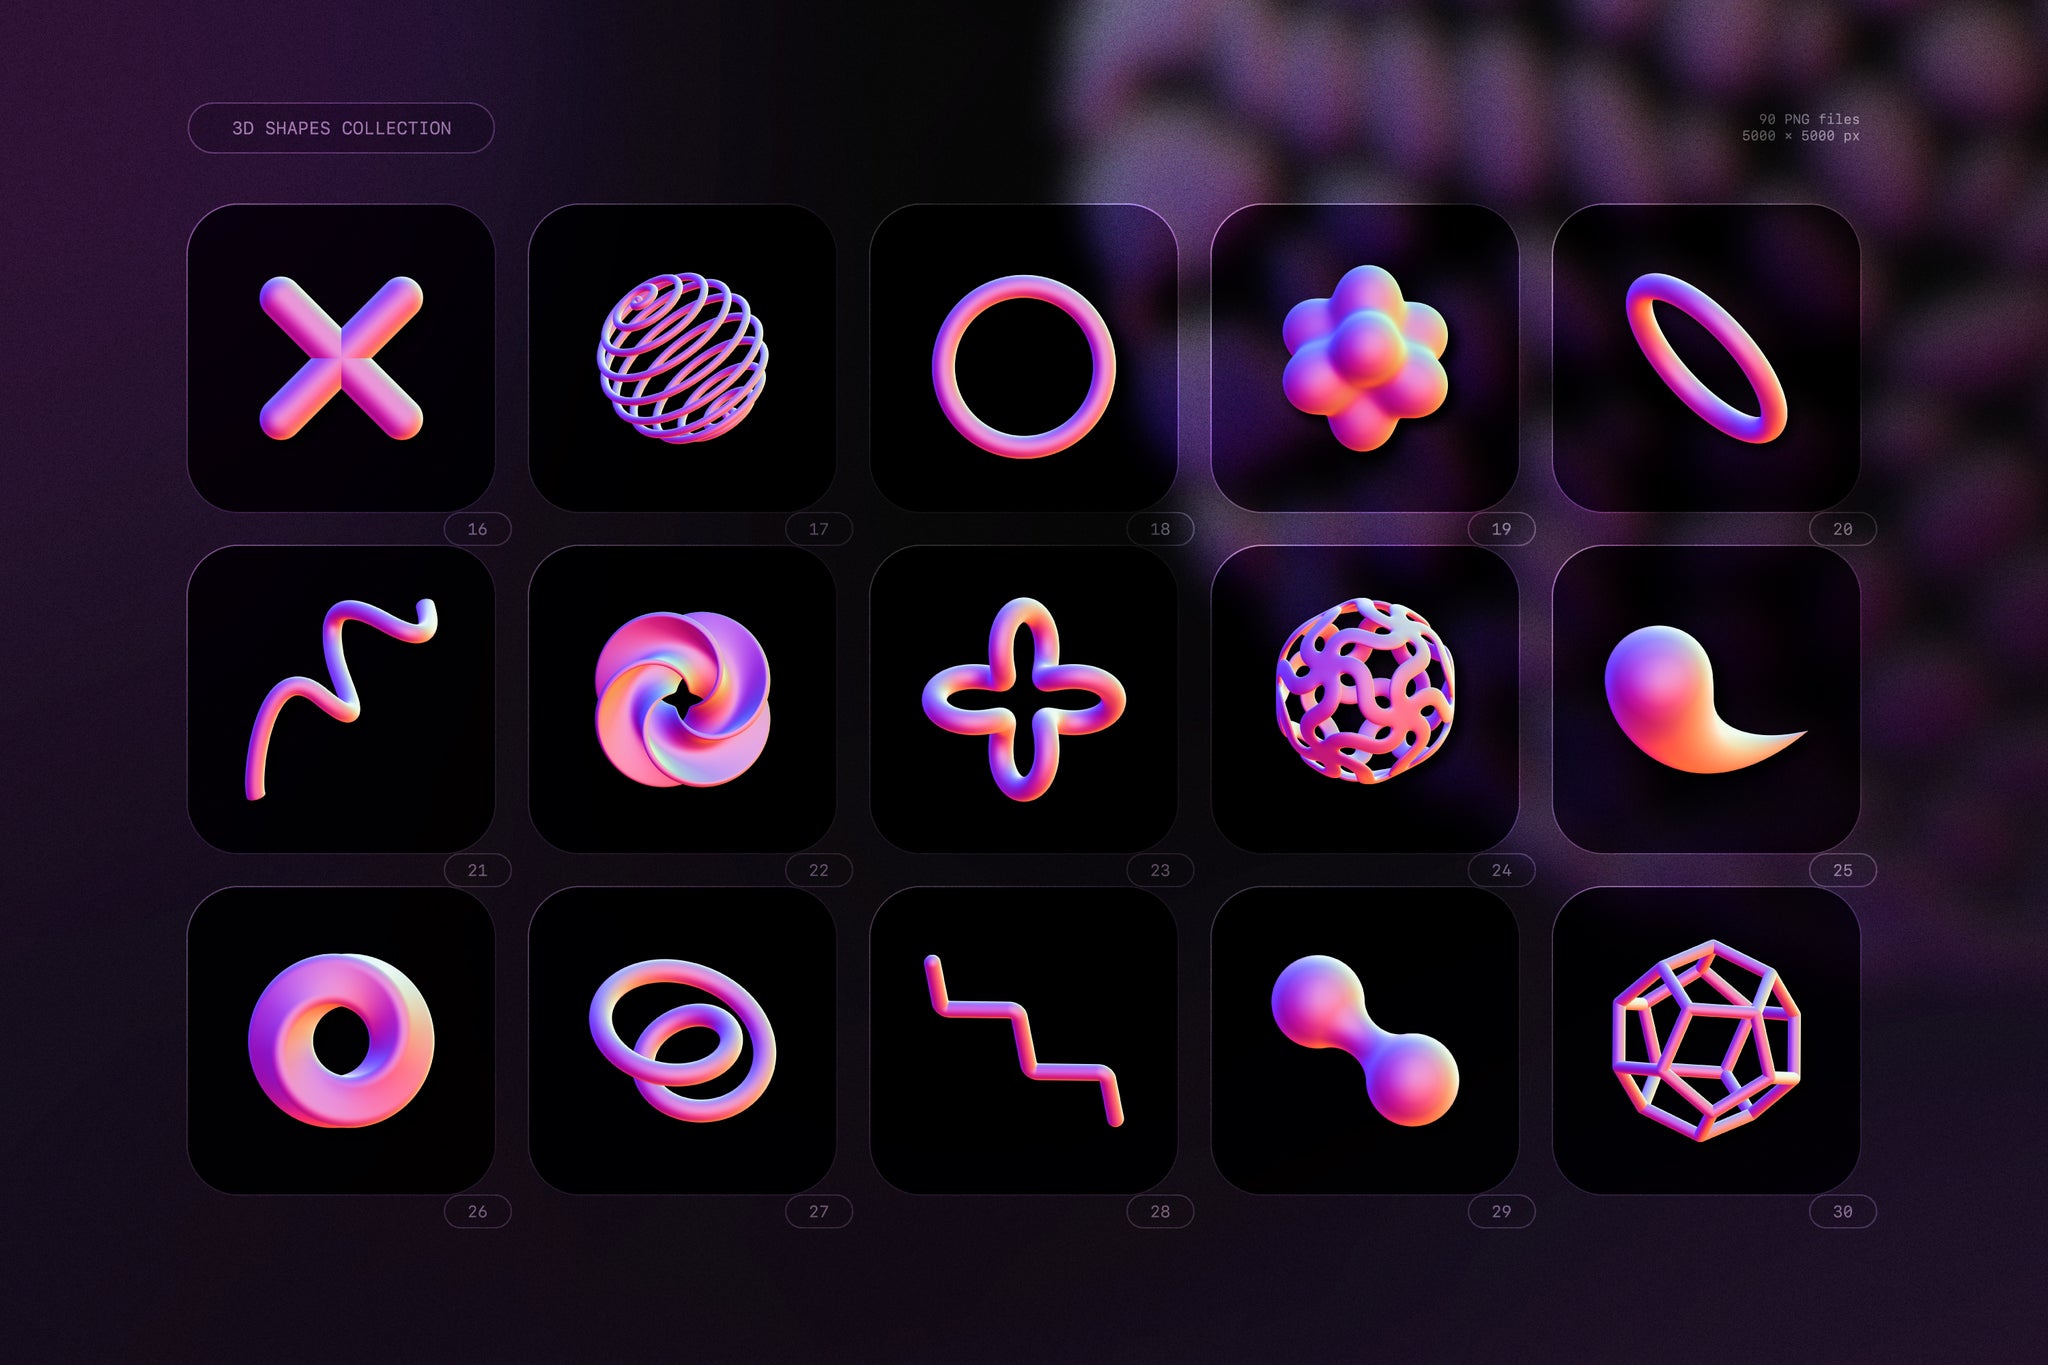 3D Shapes Collection - 90 Abstract Renders